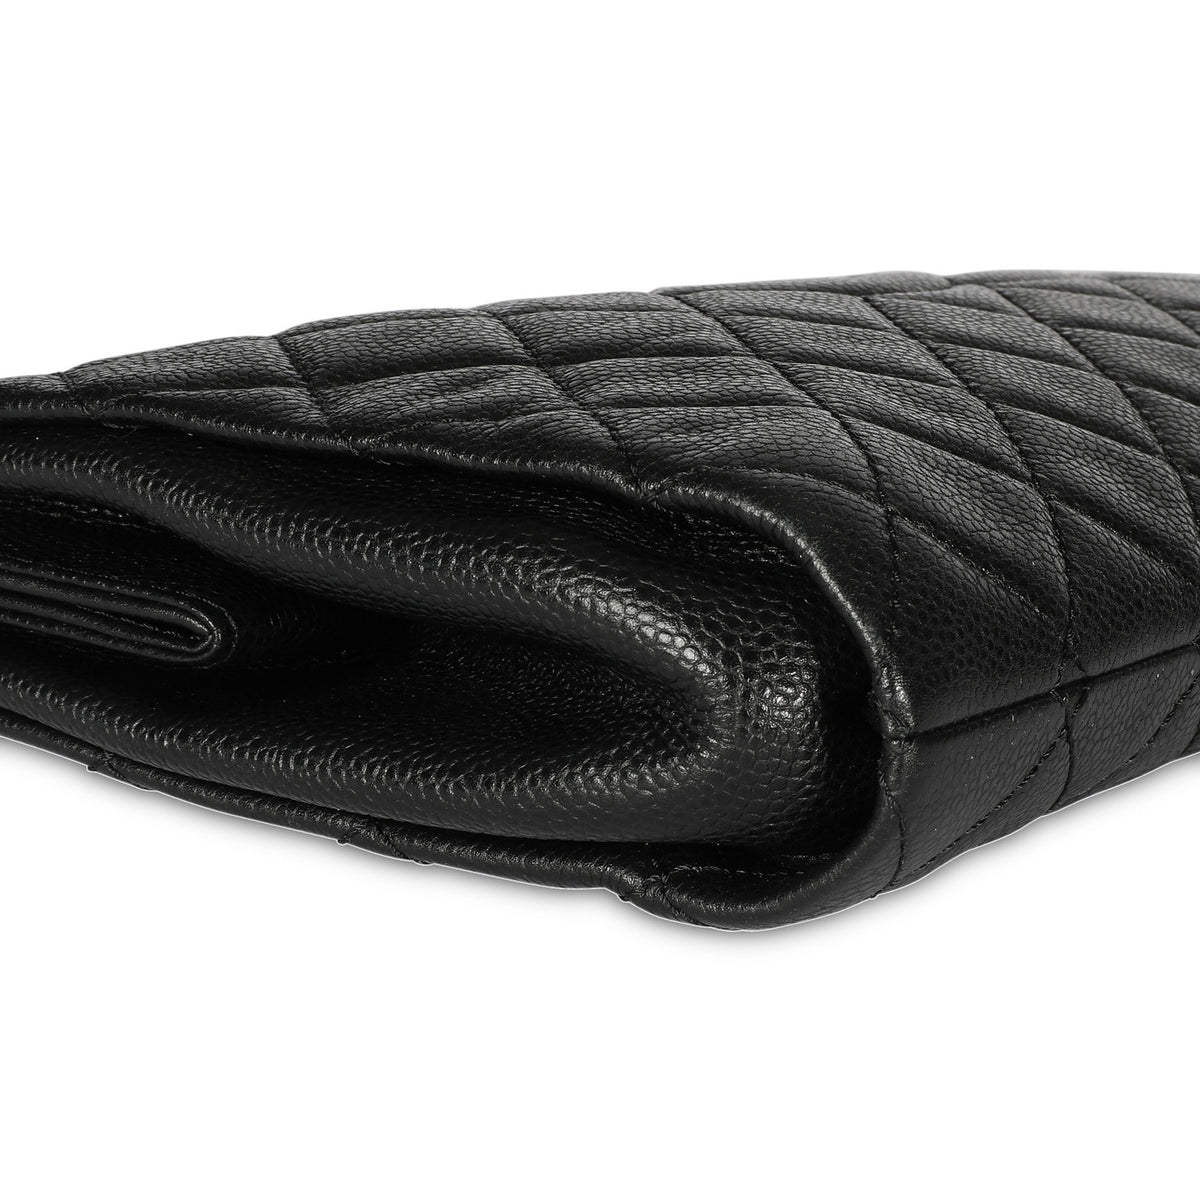 Chanel Black Caviar Quilted Timeless Frame Clutch by WP Diamonds – myGemma